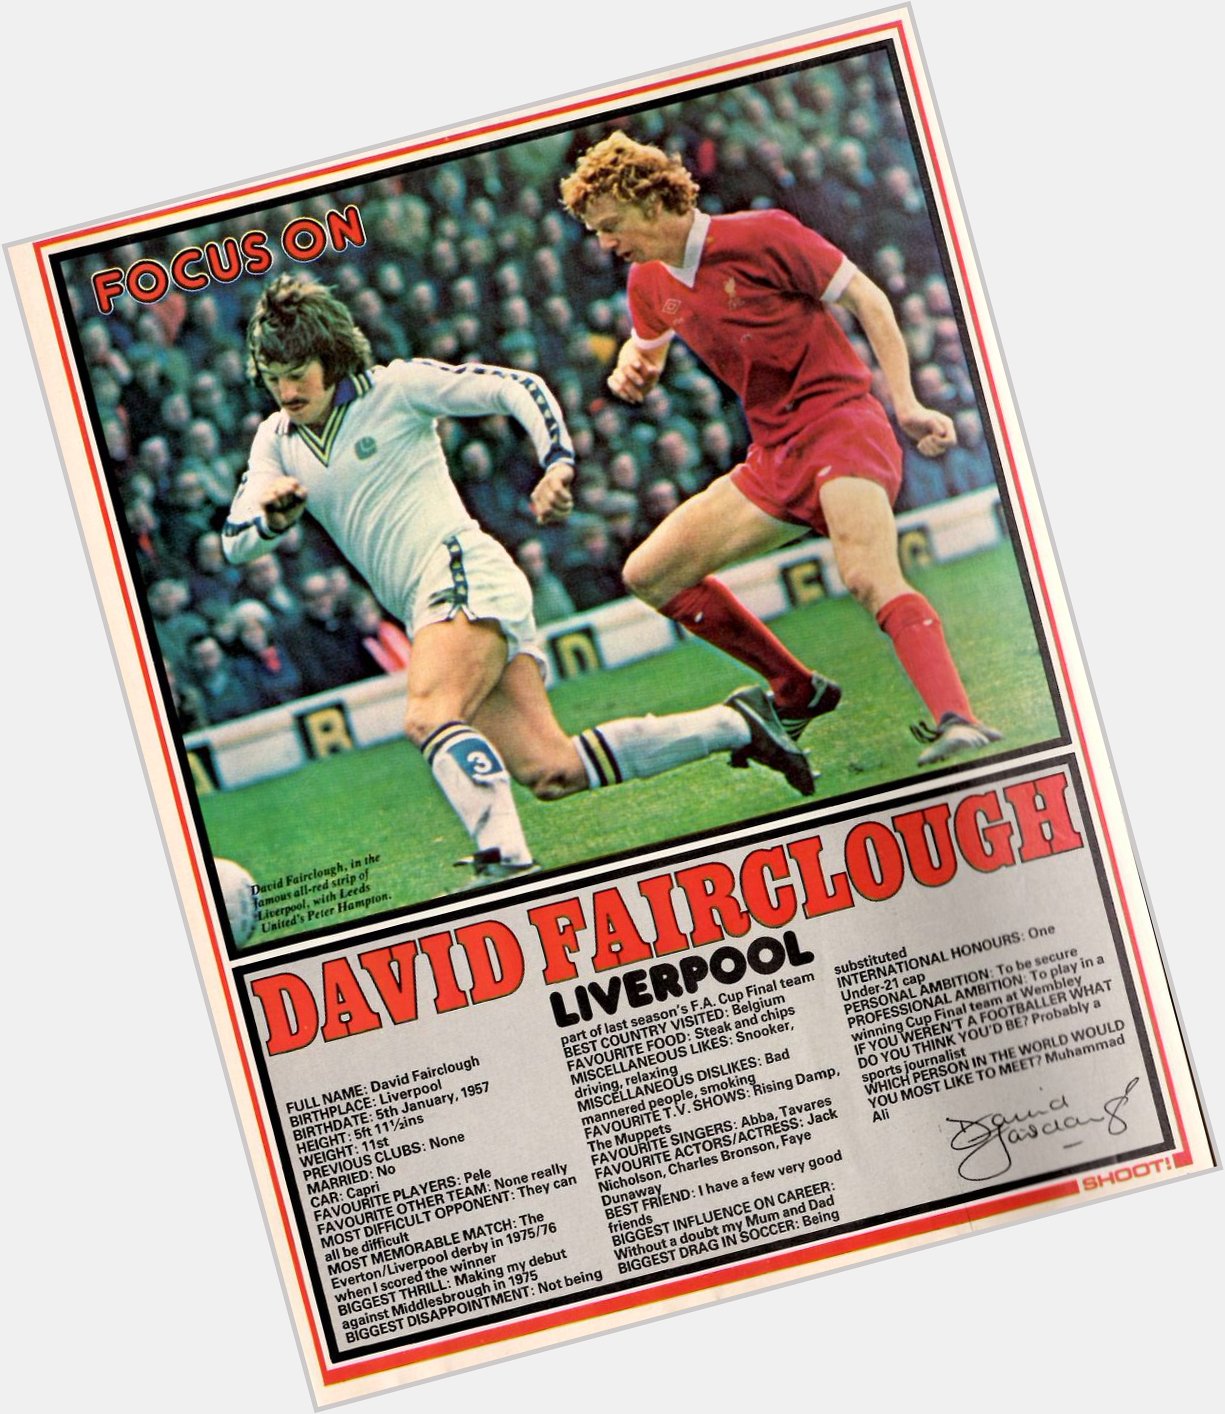 Happy Birthday legend David Fairclough who won 3 Leagues & 2 European Cups but who always wanted that 